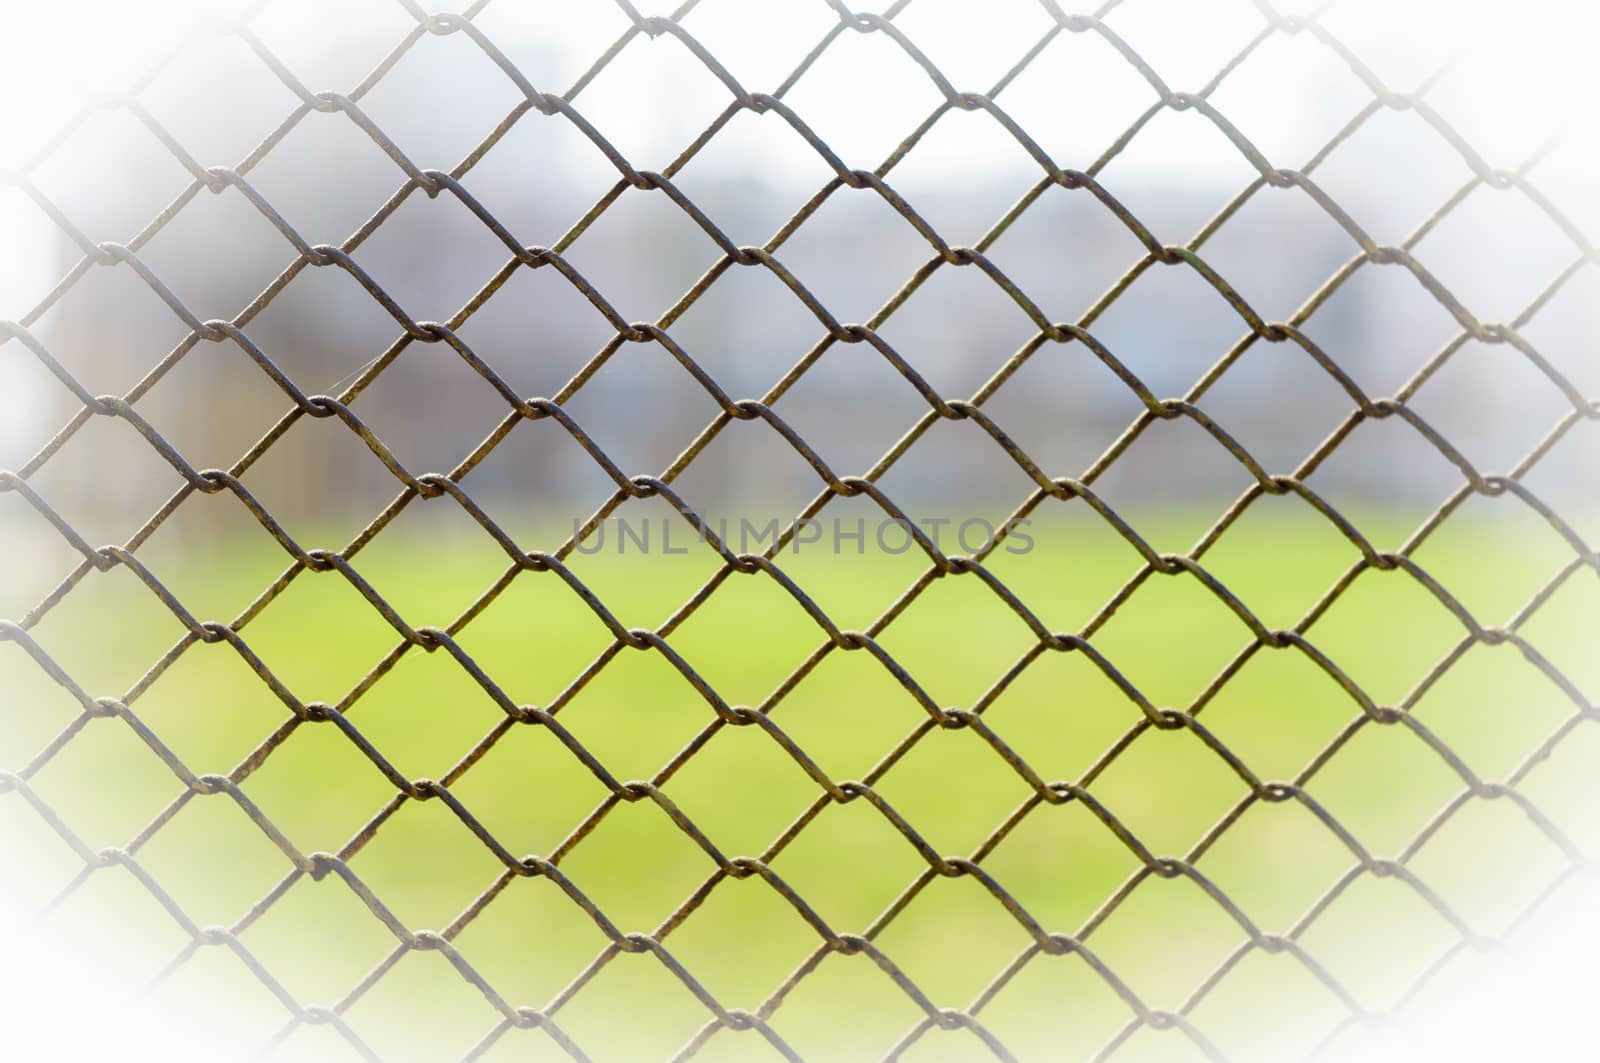 A metallic wire fence for enclosing with security